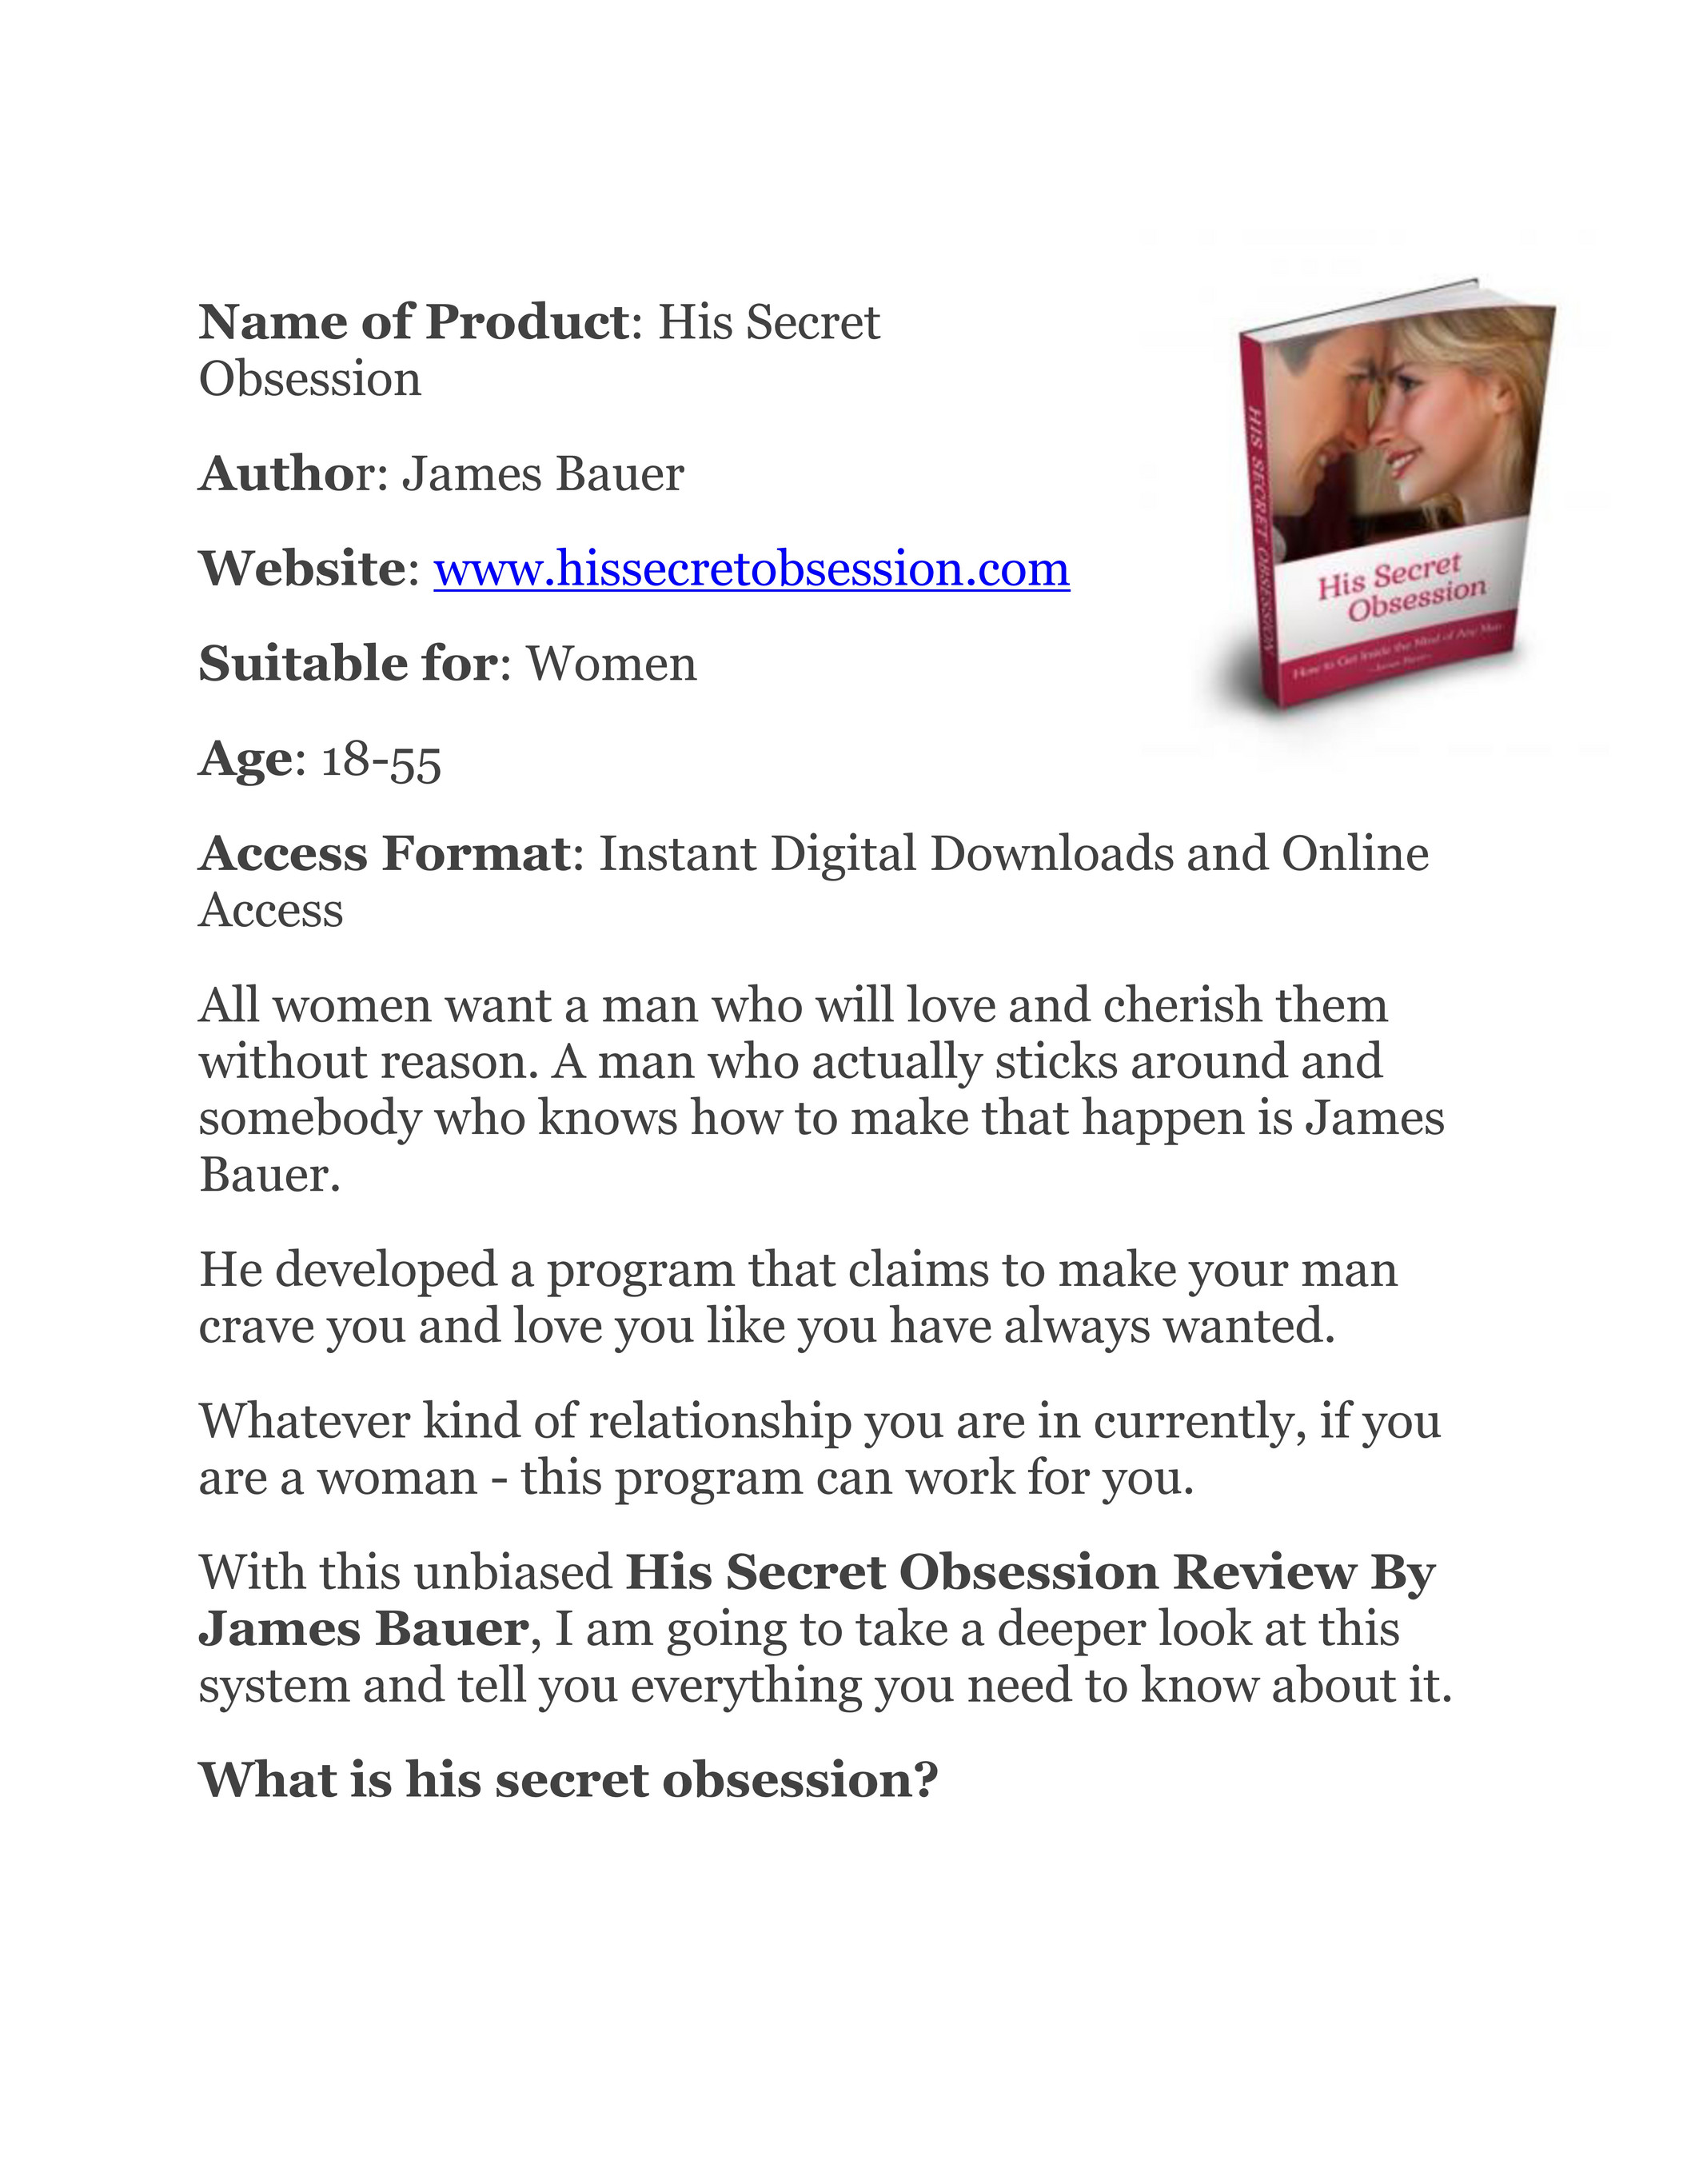 His Secret Obsession Review Is Crucial To Your Business. Learn Why!